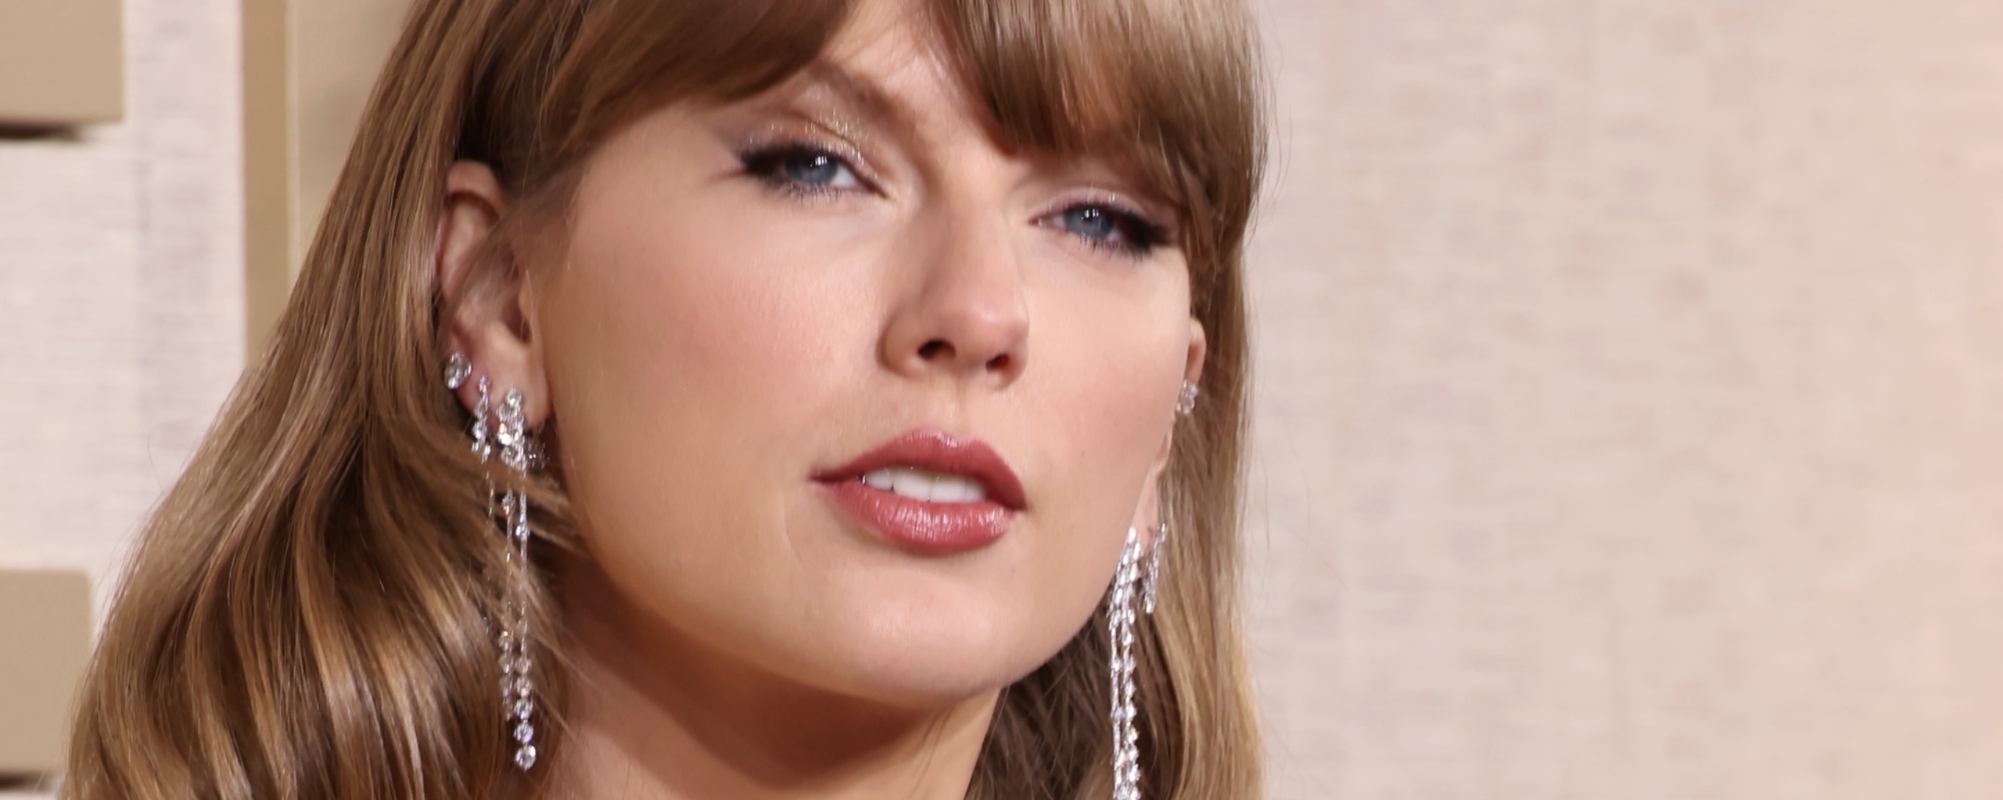 Harvard Searching for More Teaching Assistants as Demand for Taylor Swift Course Skyrockets